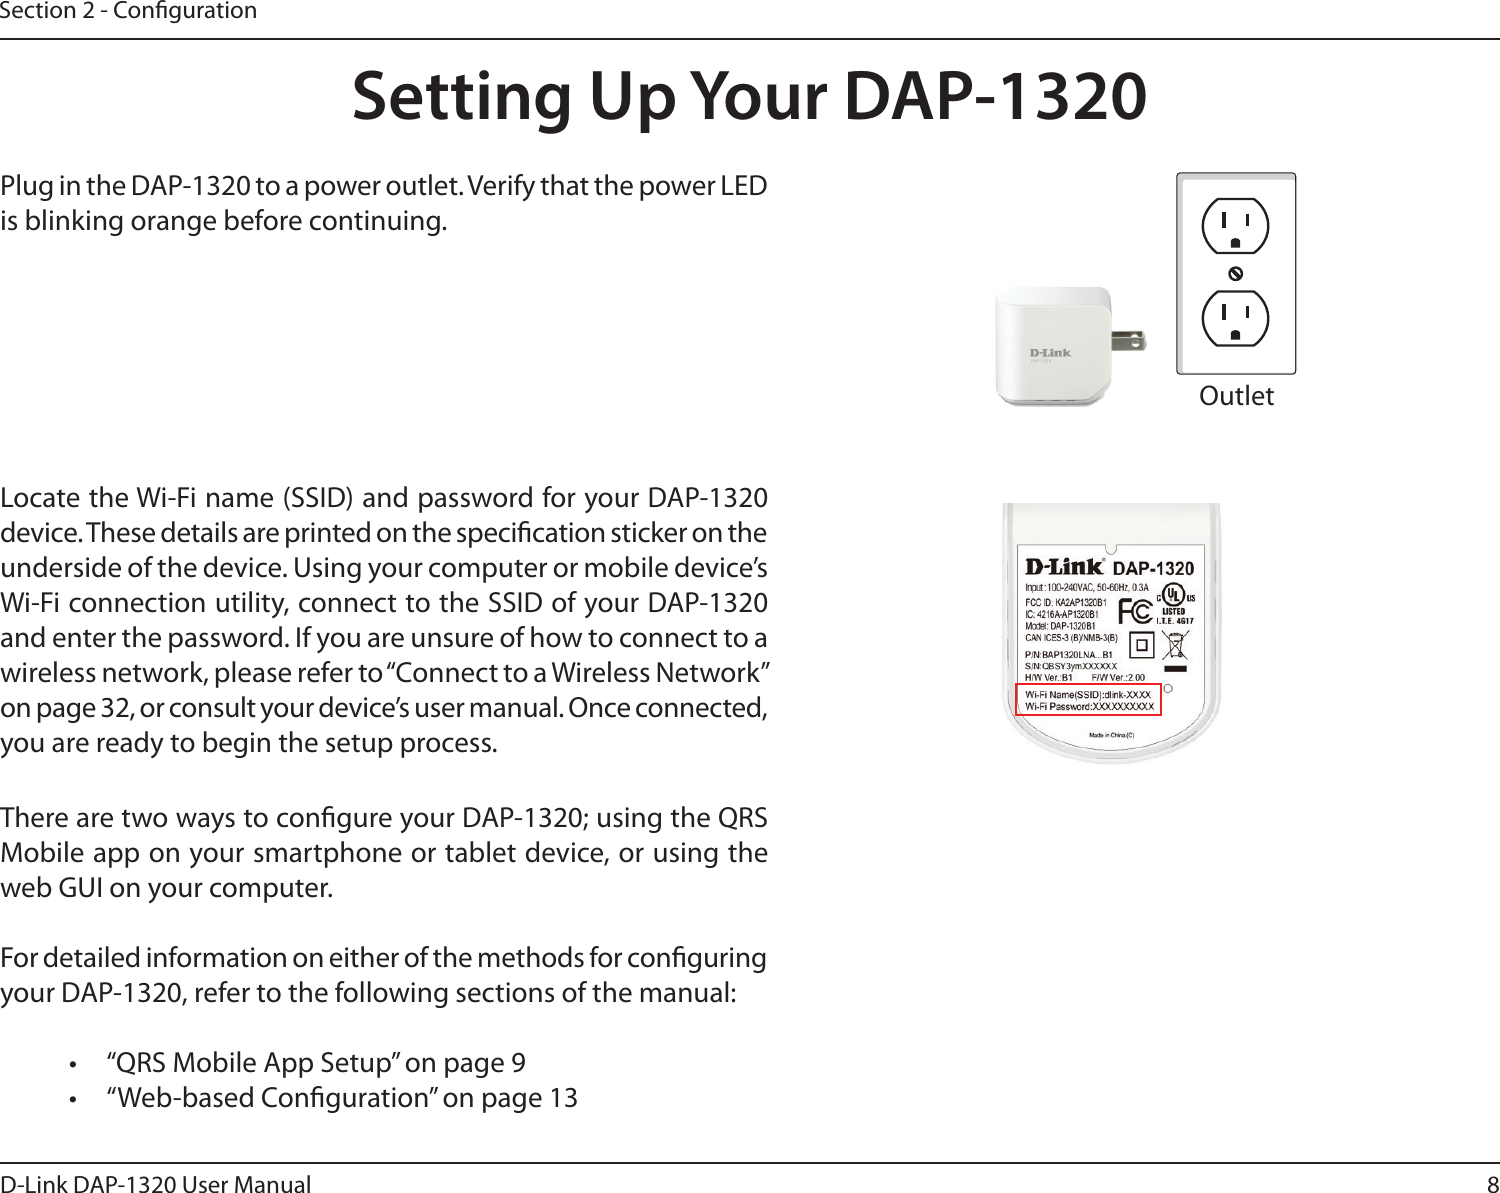 8D-Link DAP-1320 User ManualSection 2 - CongurationSetting Up Your DAP-1320Plug in the DAP-1320 to a power outlet. Verify that the power LED is blinking orange before continuing.OutletEthernetThere are two ways to congure your DAP-1320; using the QRS Mobile app on your smartphone or tablet device, or using the web GUI on your computer.For detailed information on either of the methods for conguring your DAP-1320, refer to the following sections of the manual:•  “QRS Mobile App Setup” on page 9•  “Web-based Conguration” on page 13Locate the Wi-Fi name (SSID) and password for your DAP-1320 device. These details are printed on the specication sticker on the underside of the device. Using your computer or mobile device’s Wi-Fi connection utility, connect to the SSID of your DAP-1320 and enter the password. If you are unsure of how to connect to a wireless network, please refer to “Connect to a Wireless Network” on page 32, or consult your device’s user manual. Once connected, you are ready to begin the setup process. 